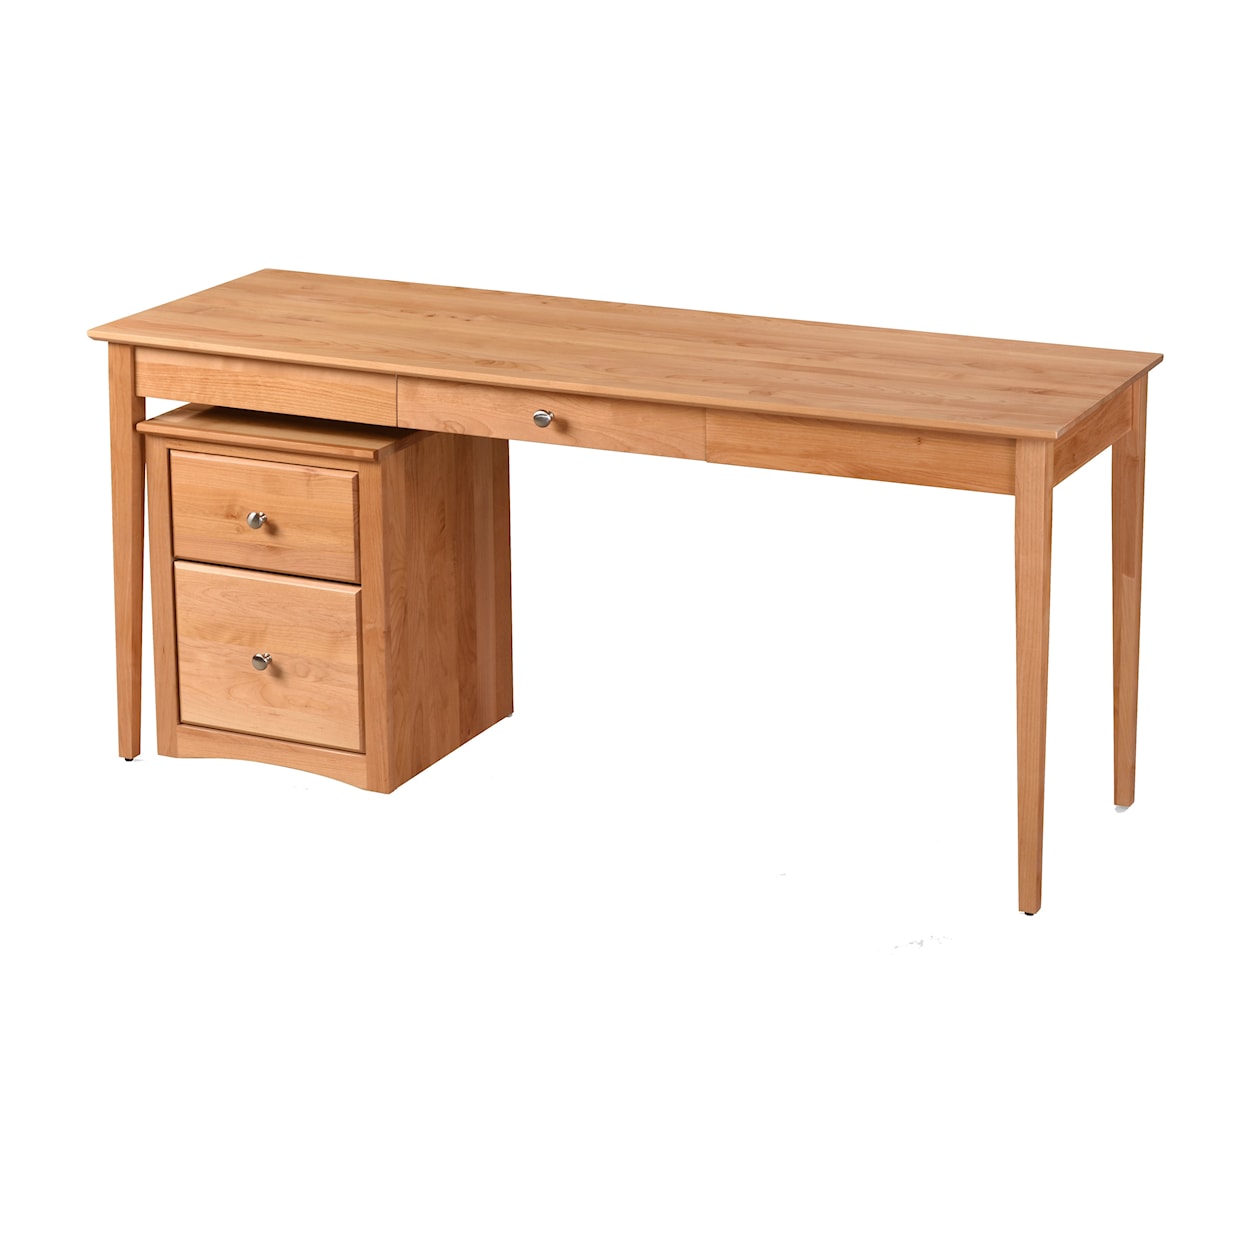 Archbold Furniture Home Office Writing Desk